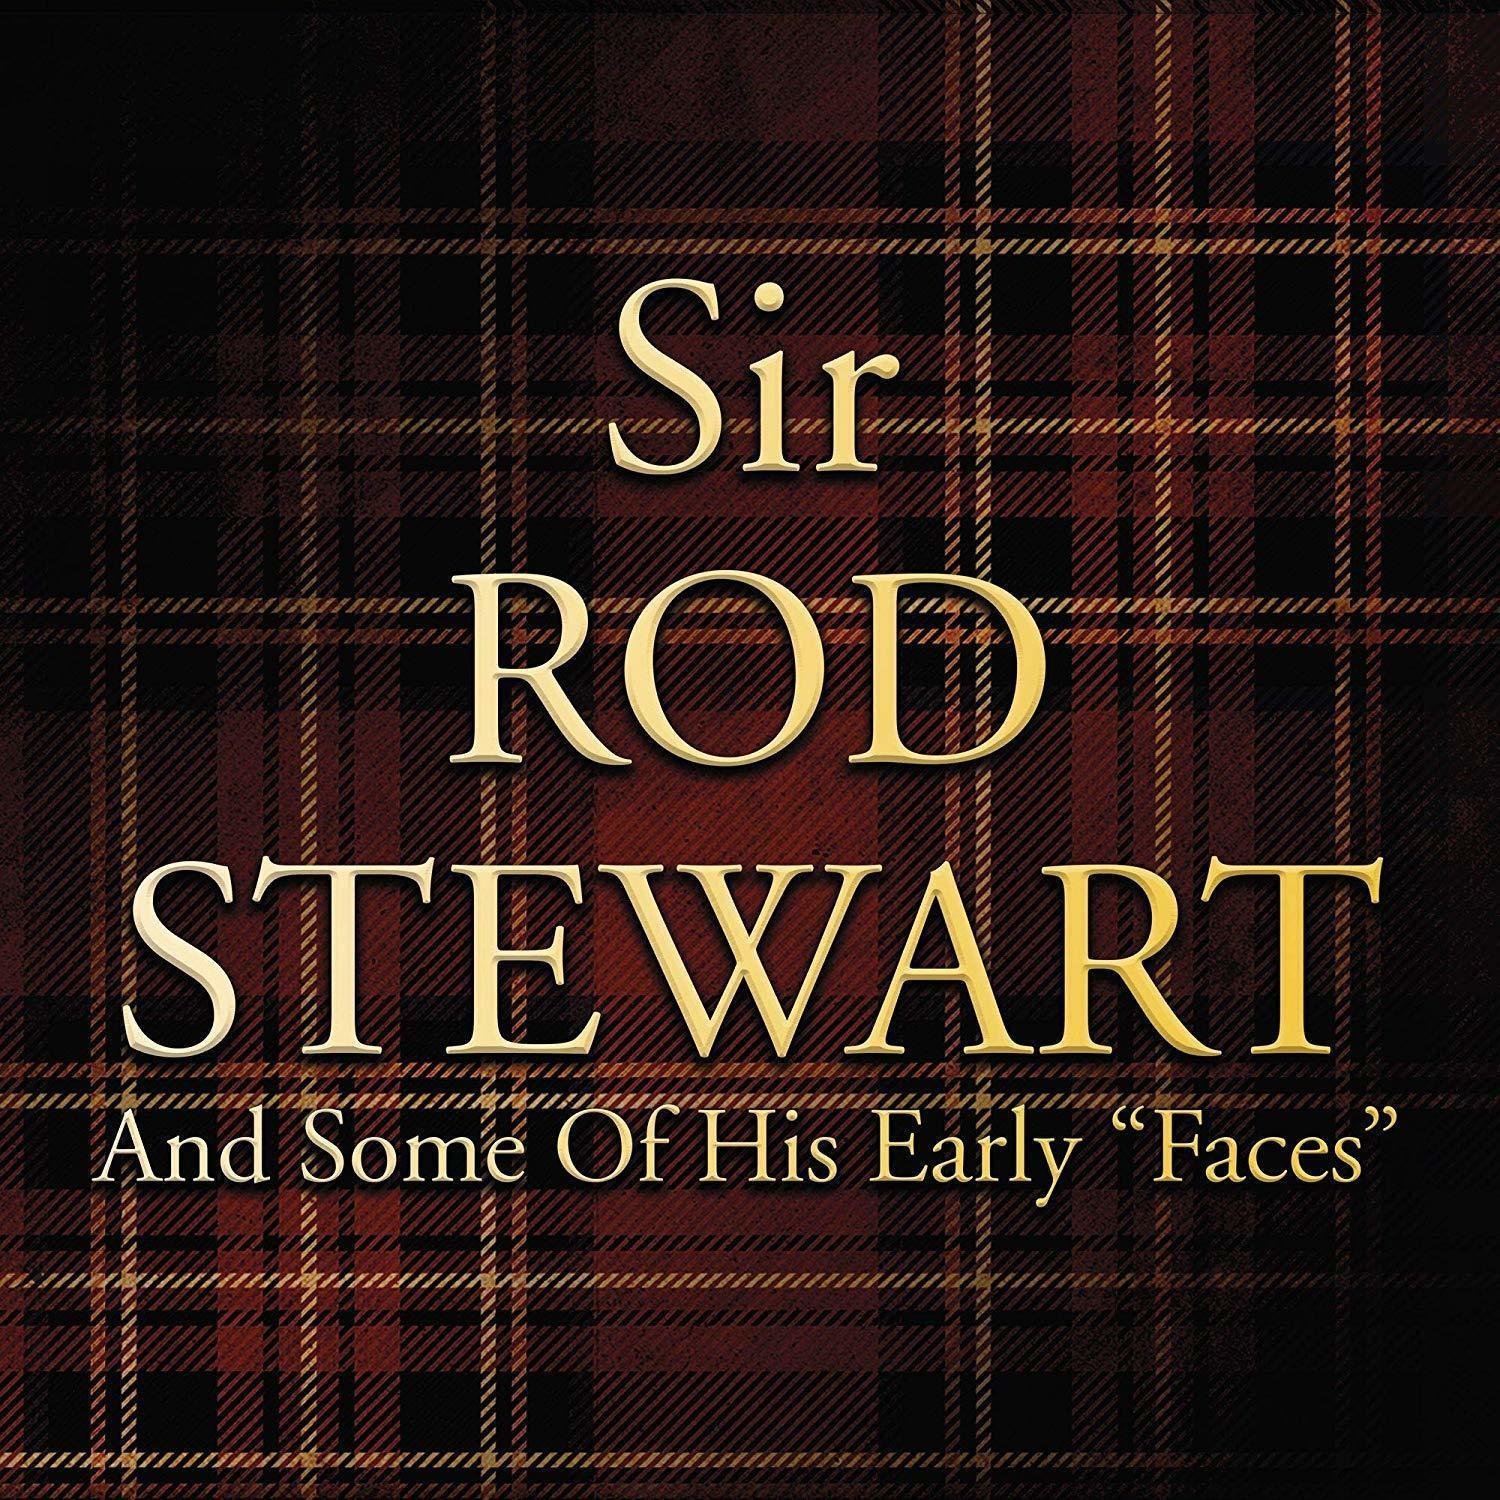 LP Rod Stewart - And Some Of His Early Faces (LP)